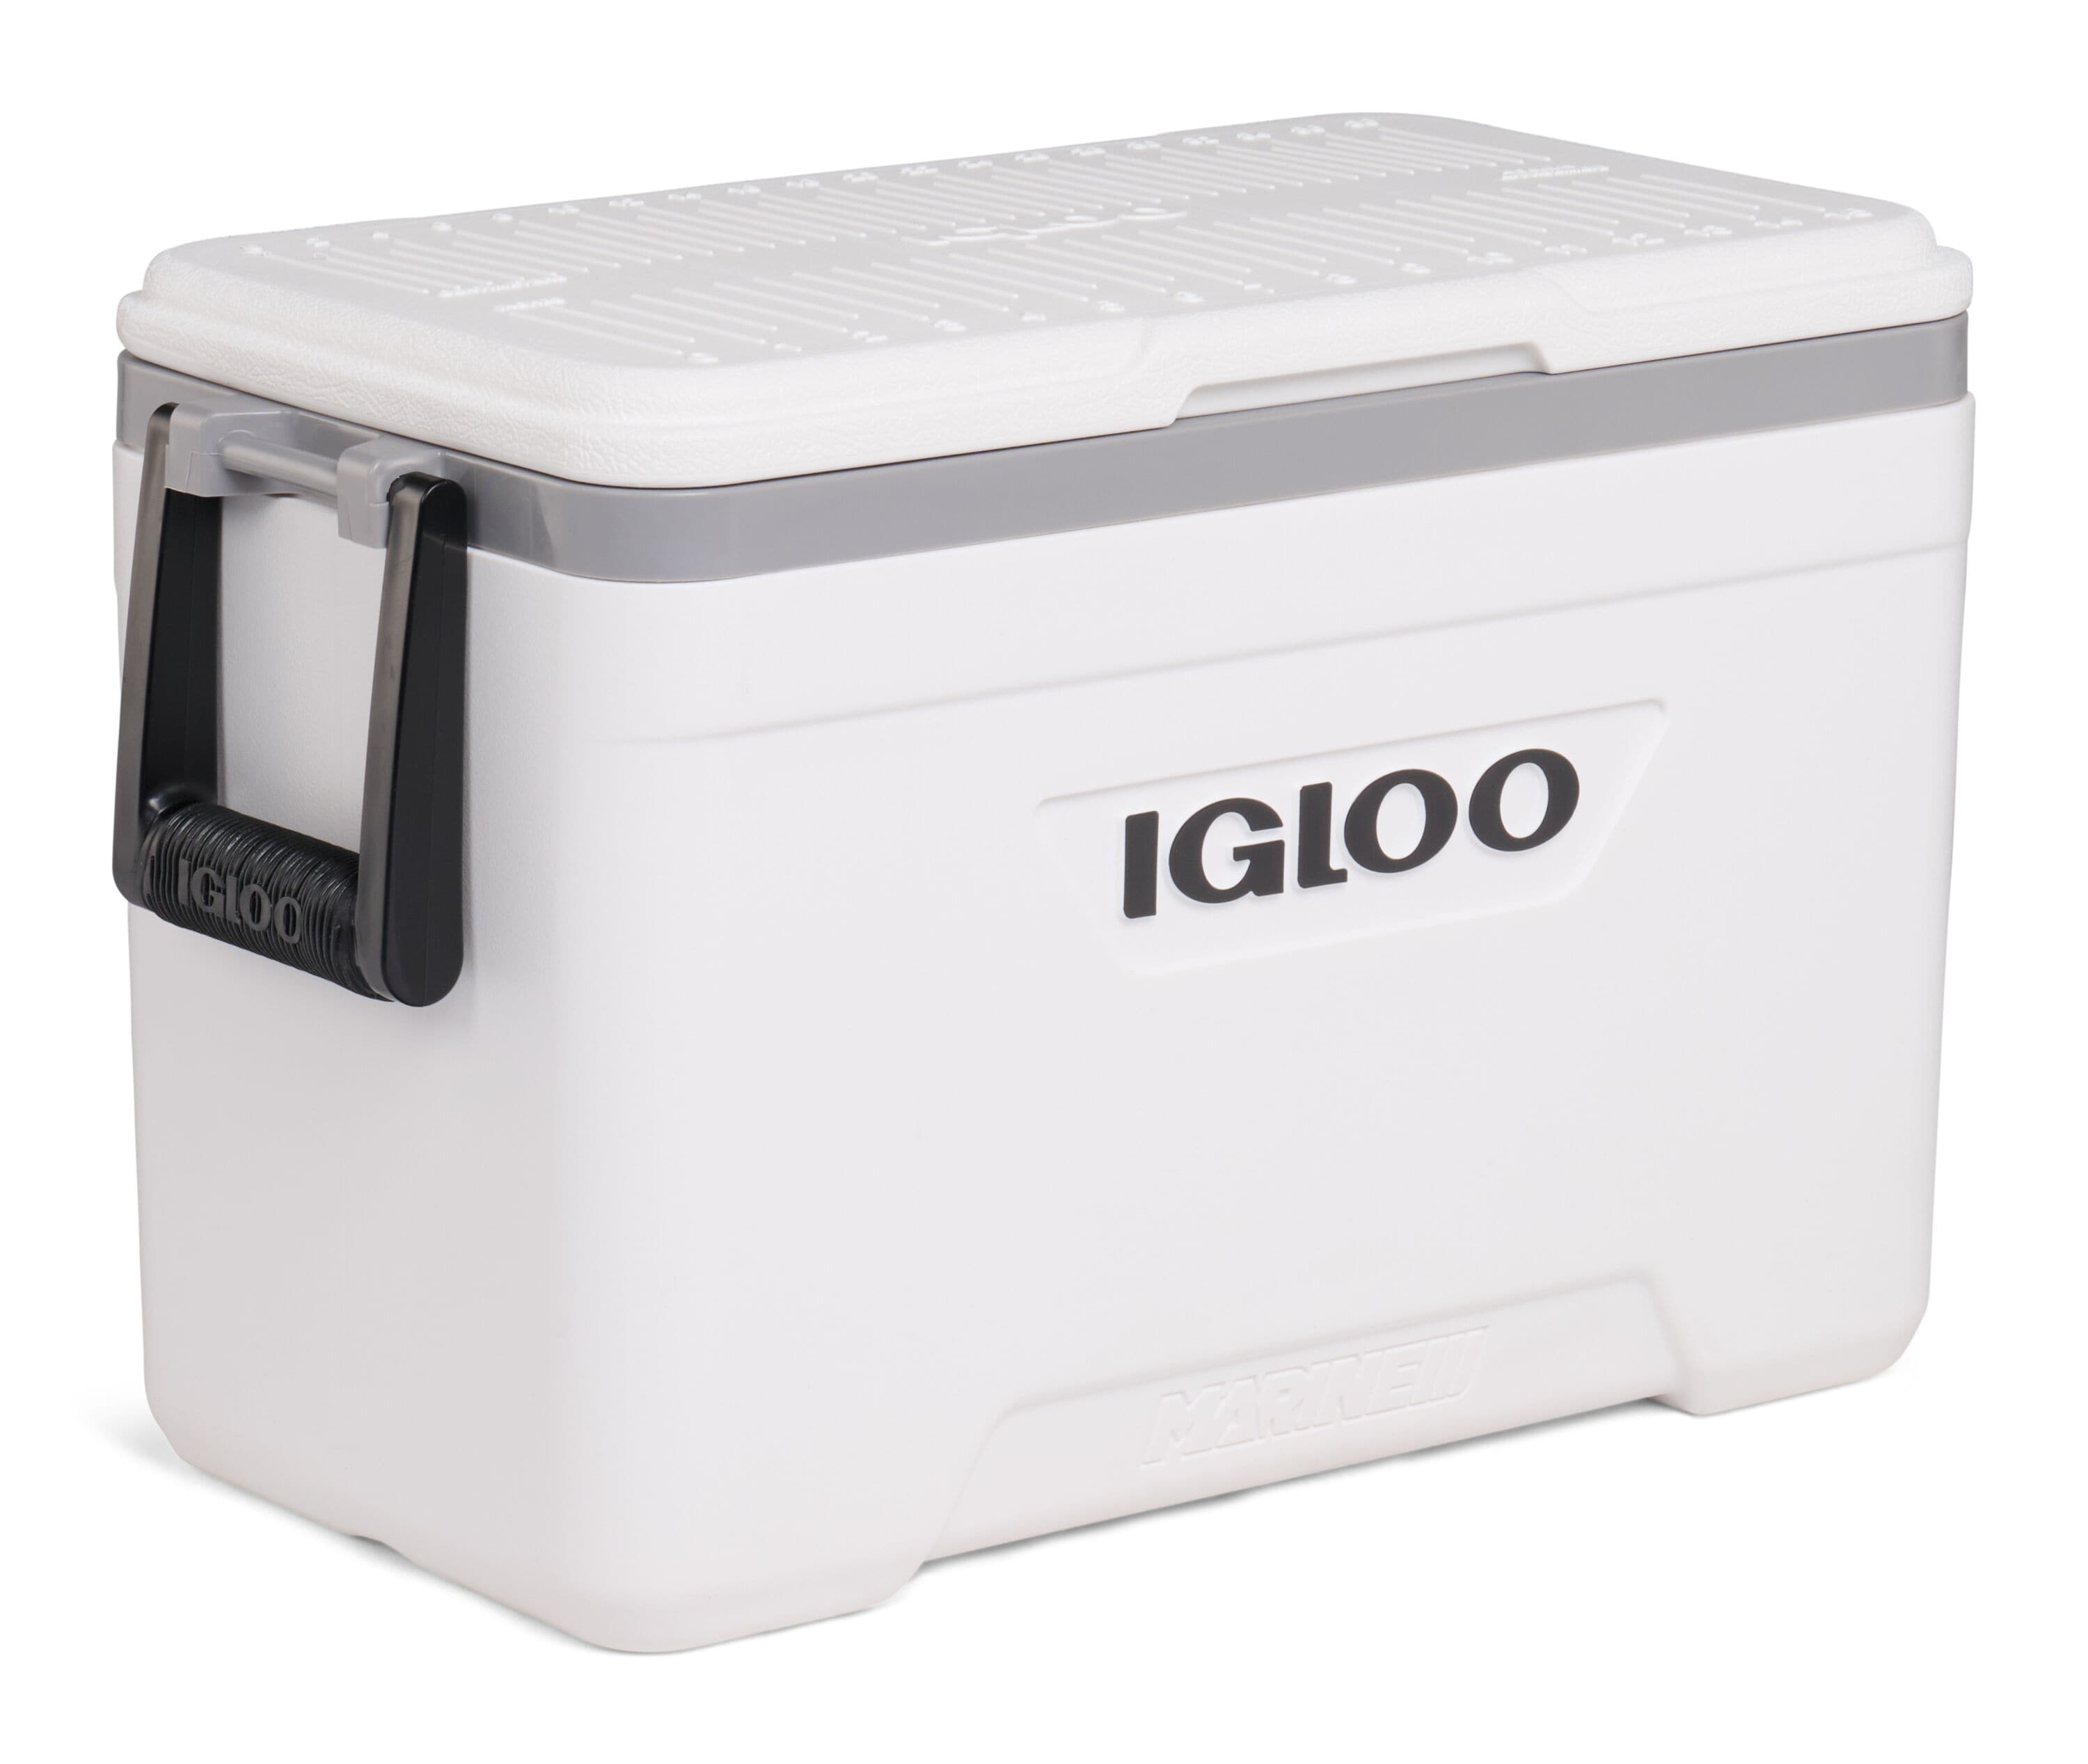 Igloo Wht.Mnscpe Gry.Wht.Blk 25-Quart Insulated Marine Cooler in